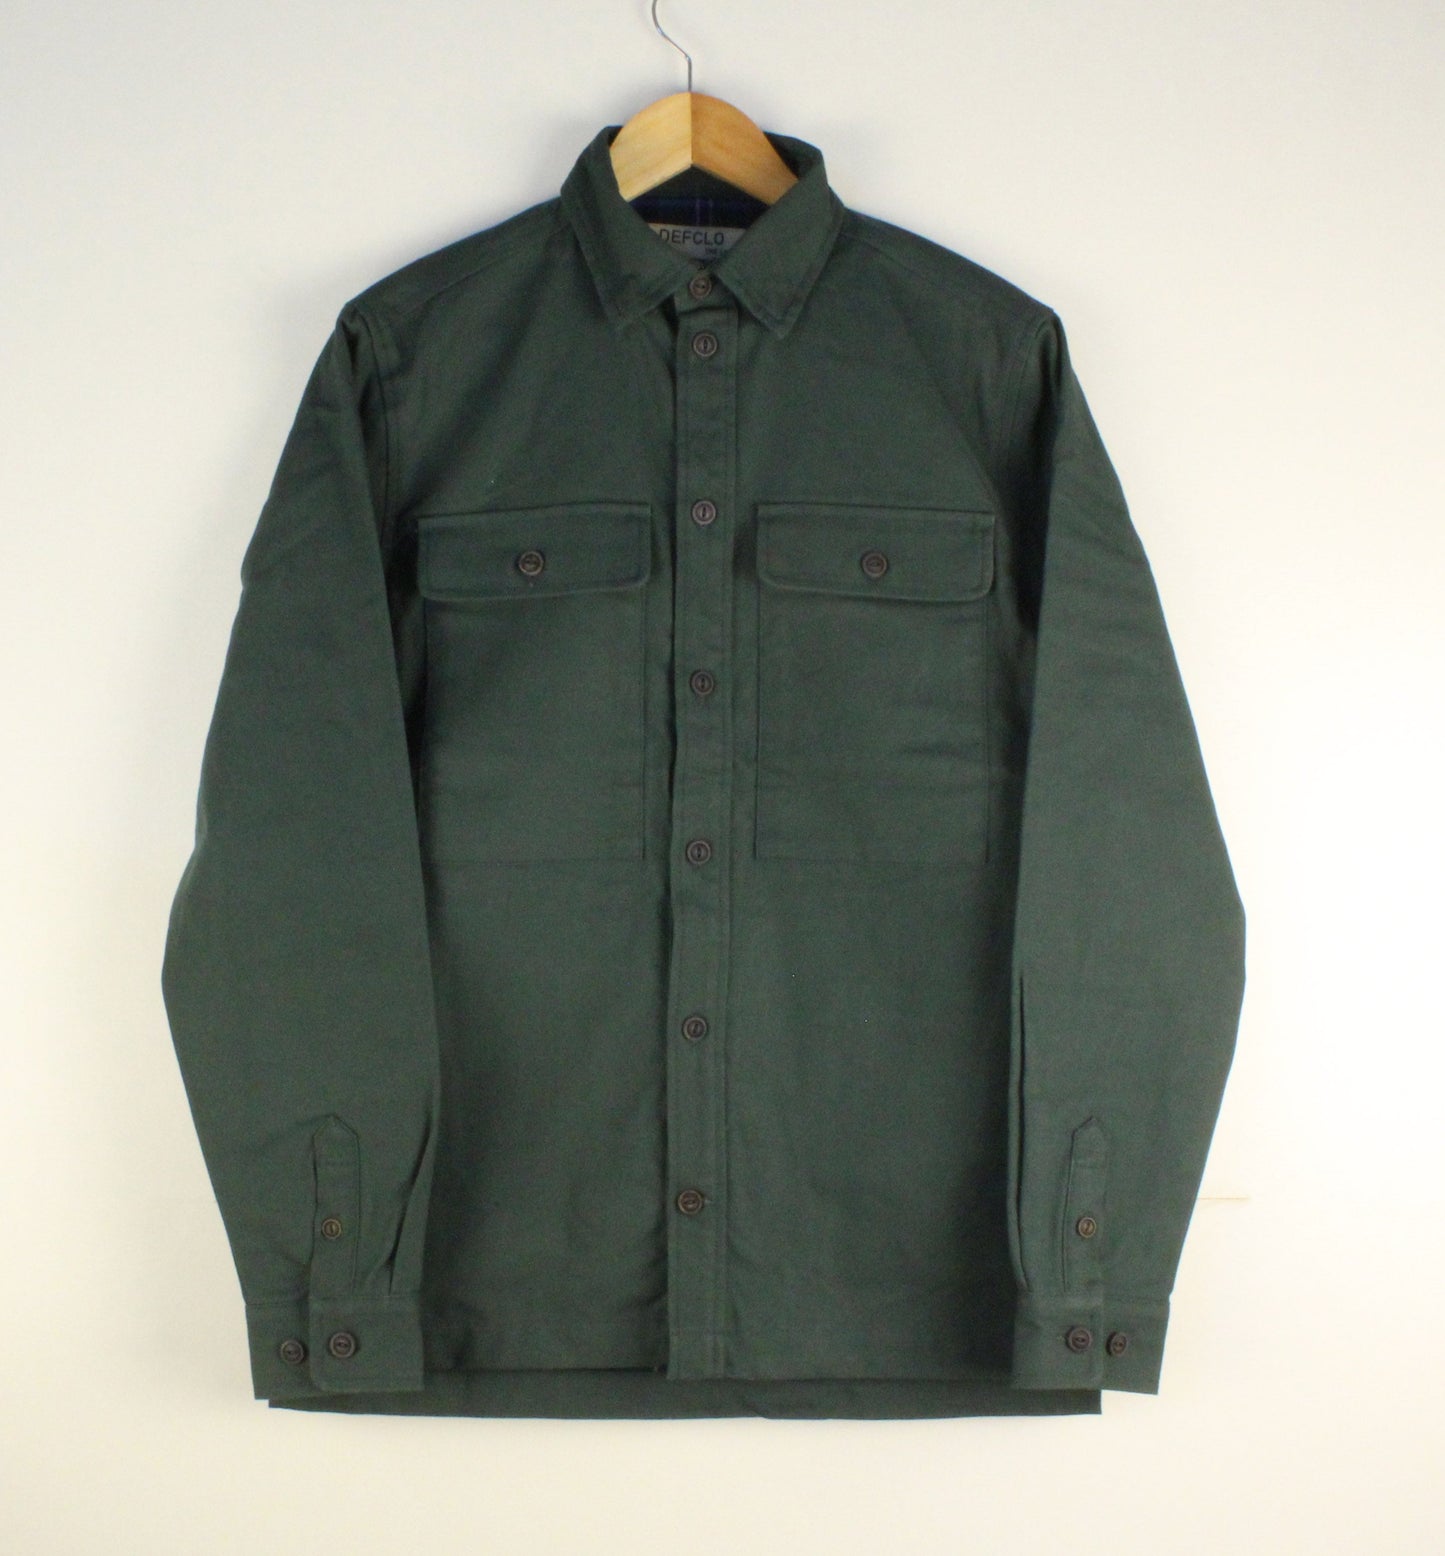 Rough & Rugged Jacket for Men - Green